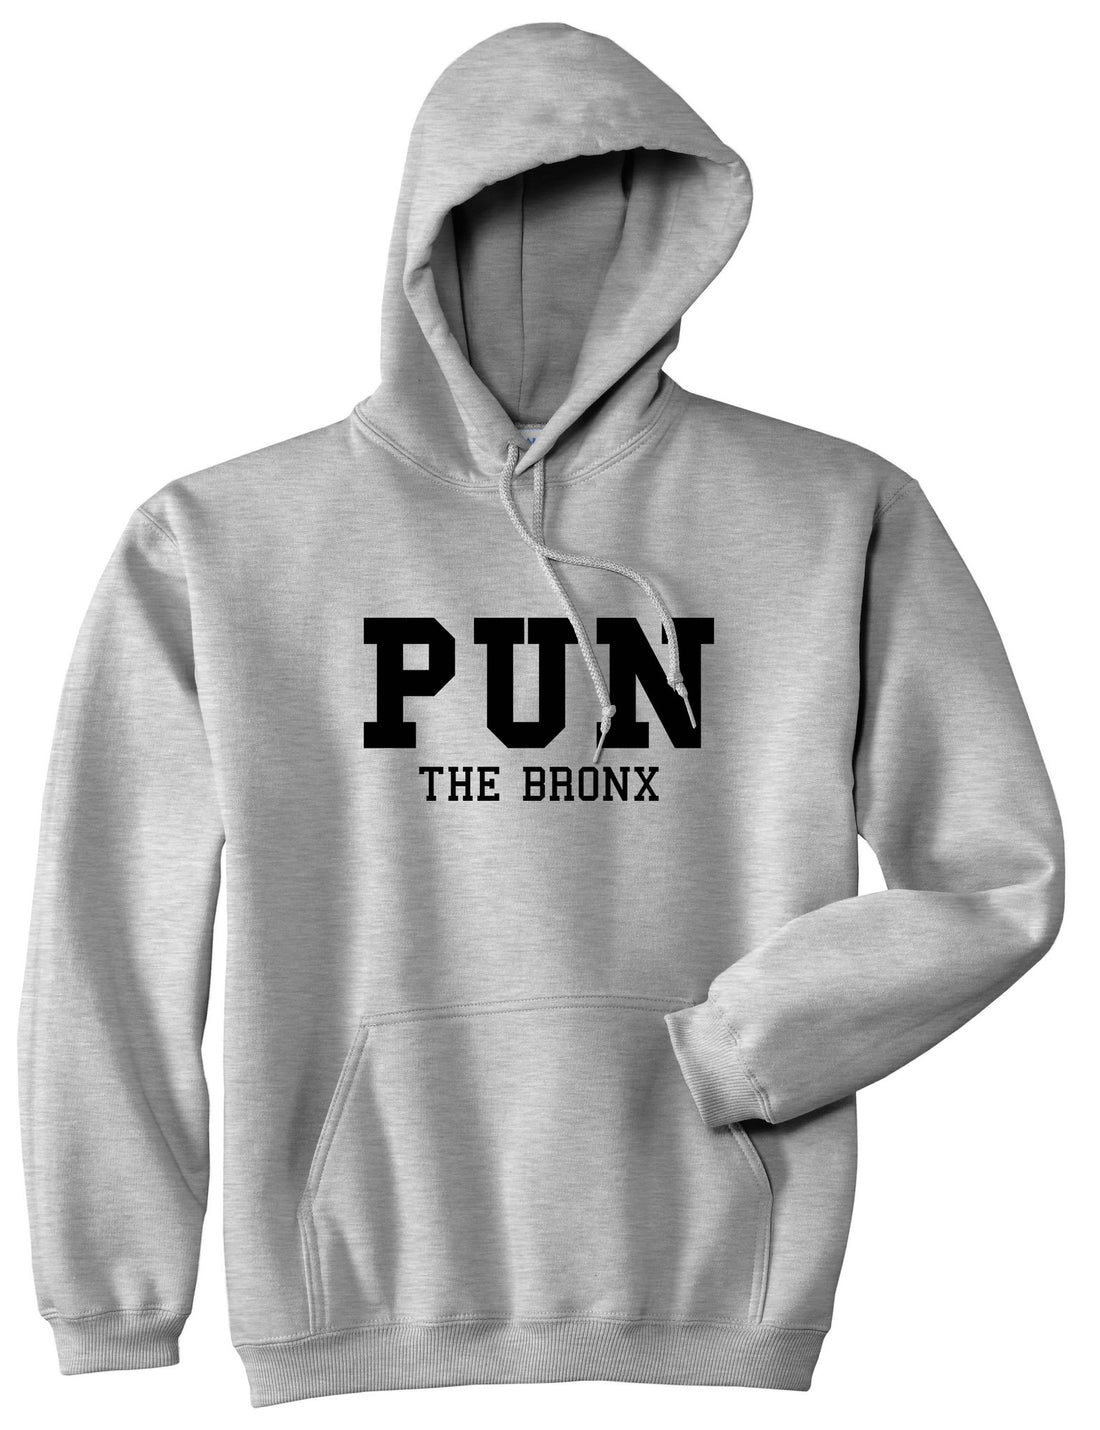 Pun The Bronx Pullover Hoodie Hoody in Grey by Kings Of NY